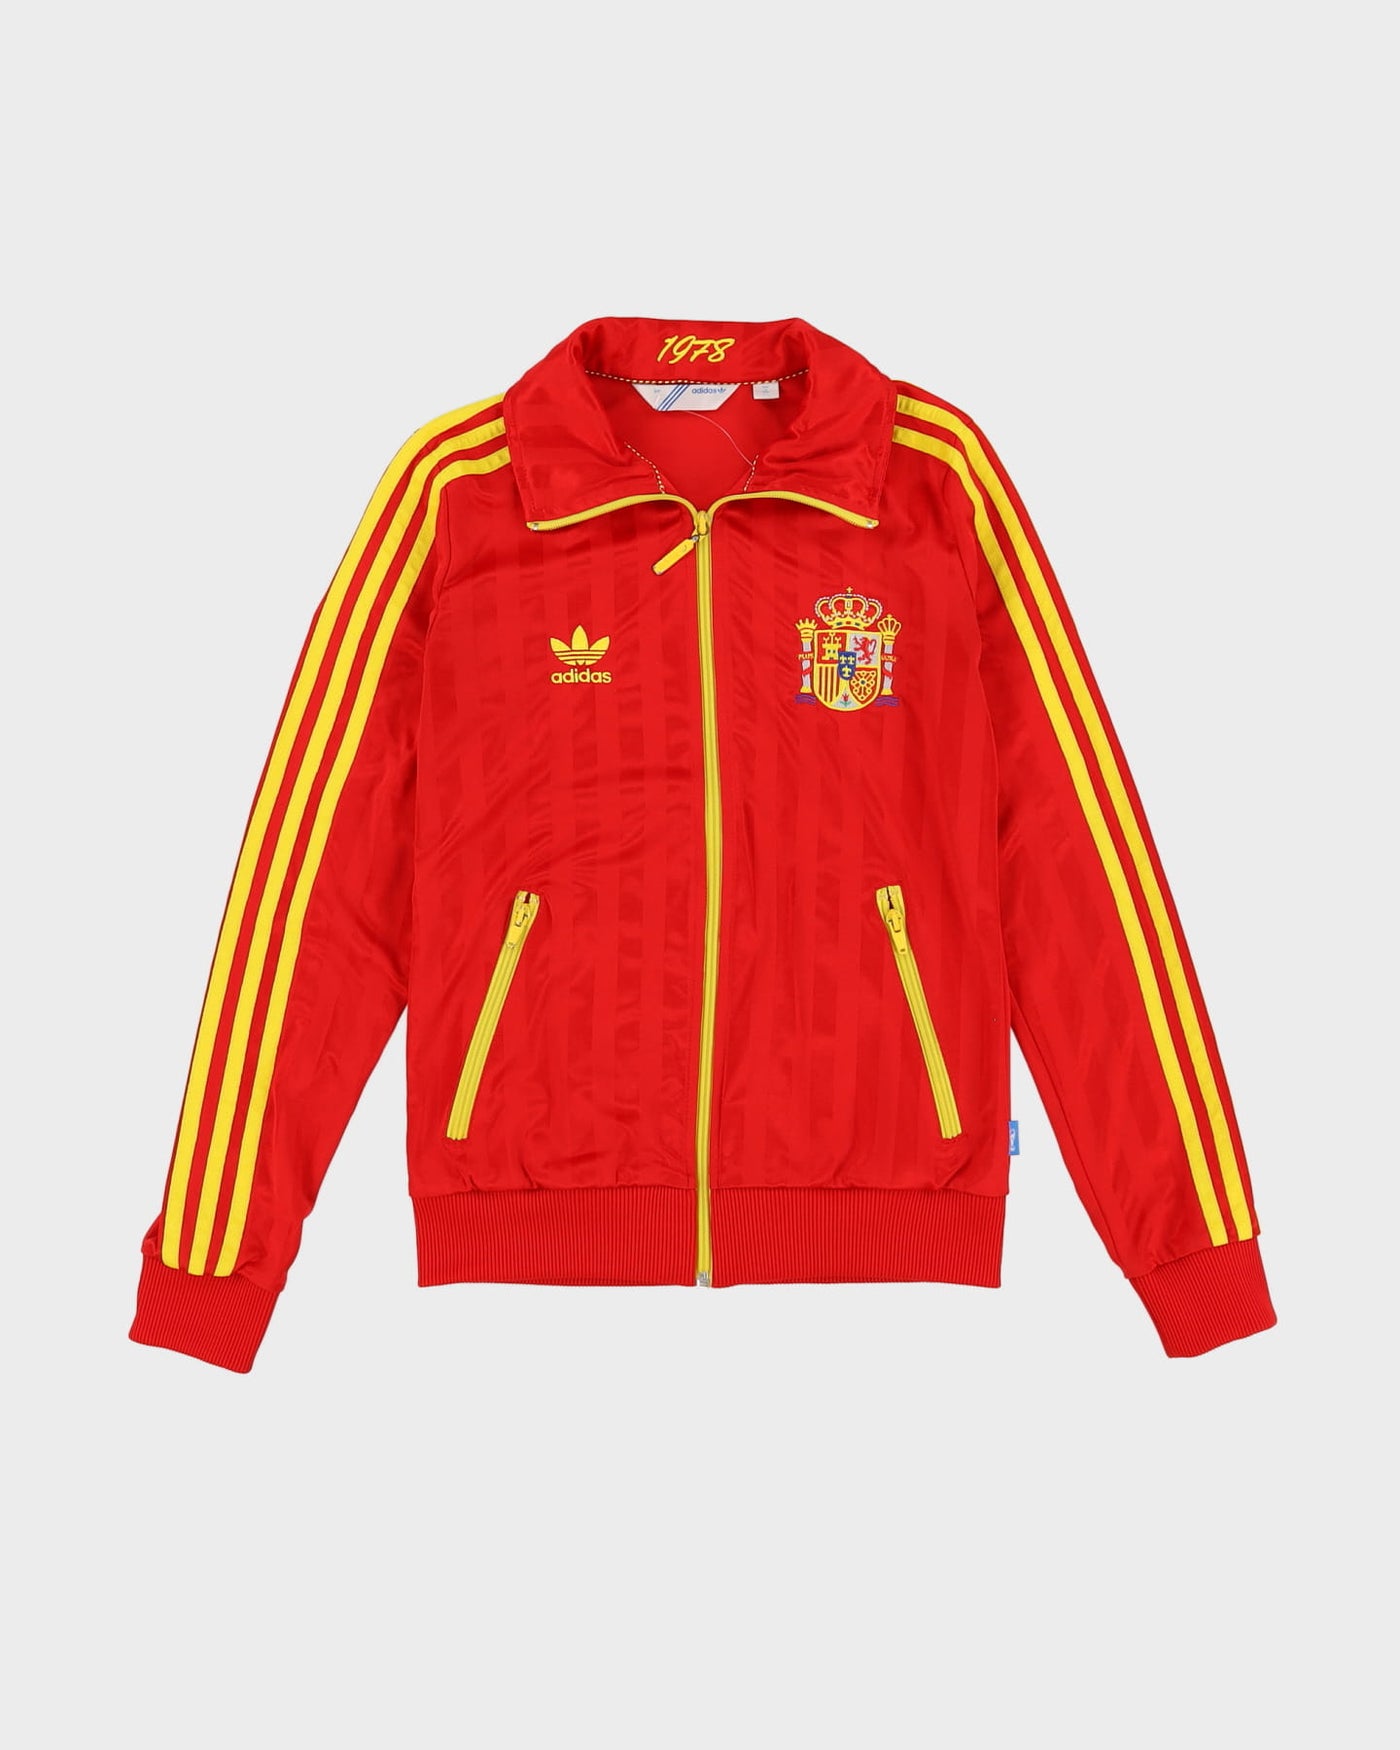 00s Adidas Spain Red / Yellow Track Jacket - S